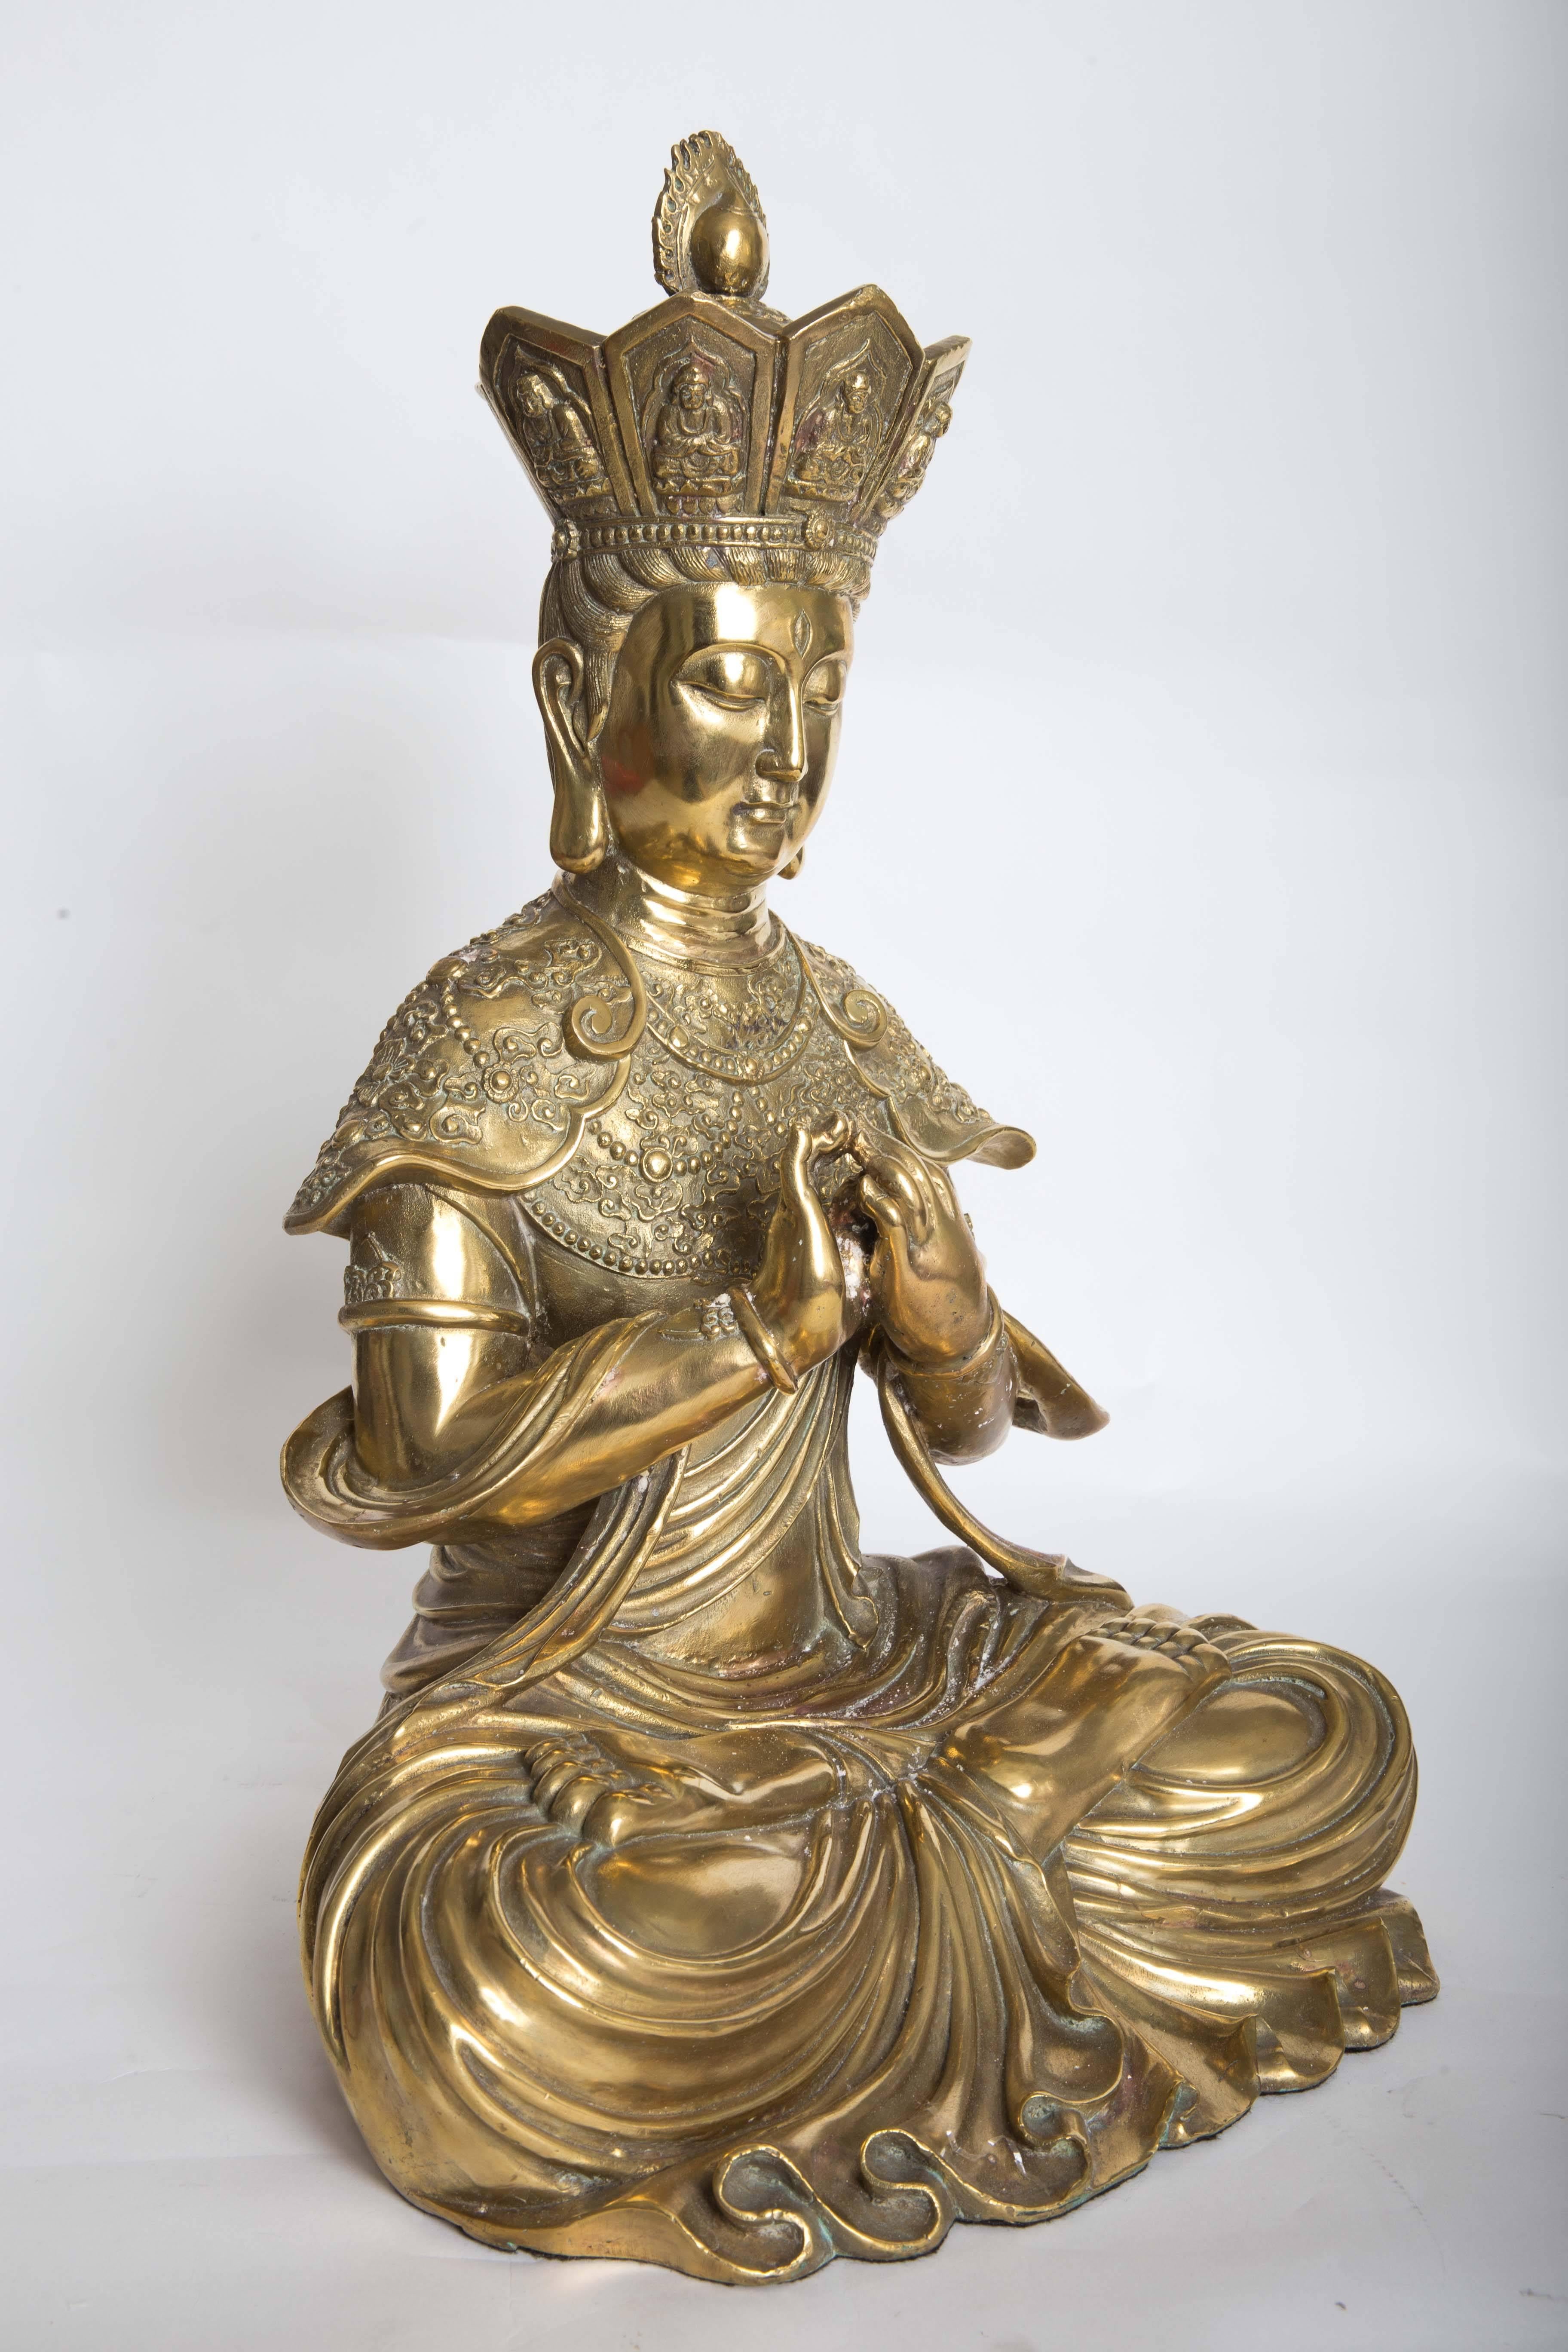 Intricately Etched Bronze Sculpture of a Seated Diety Figure 4